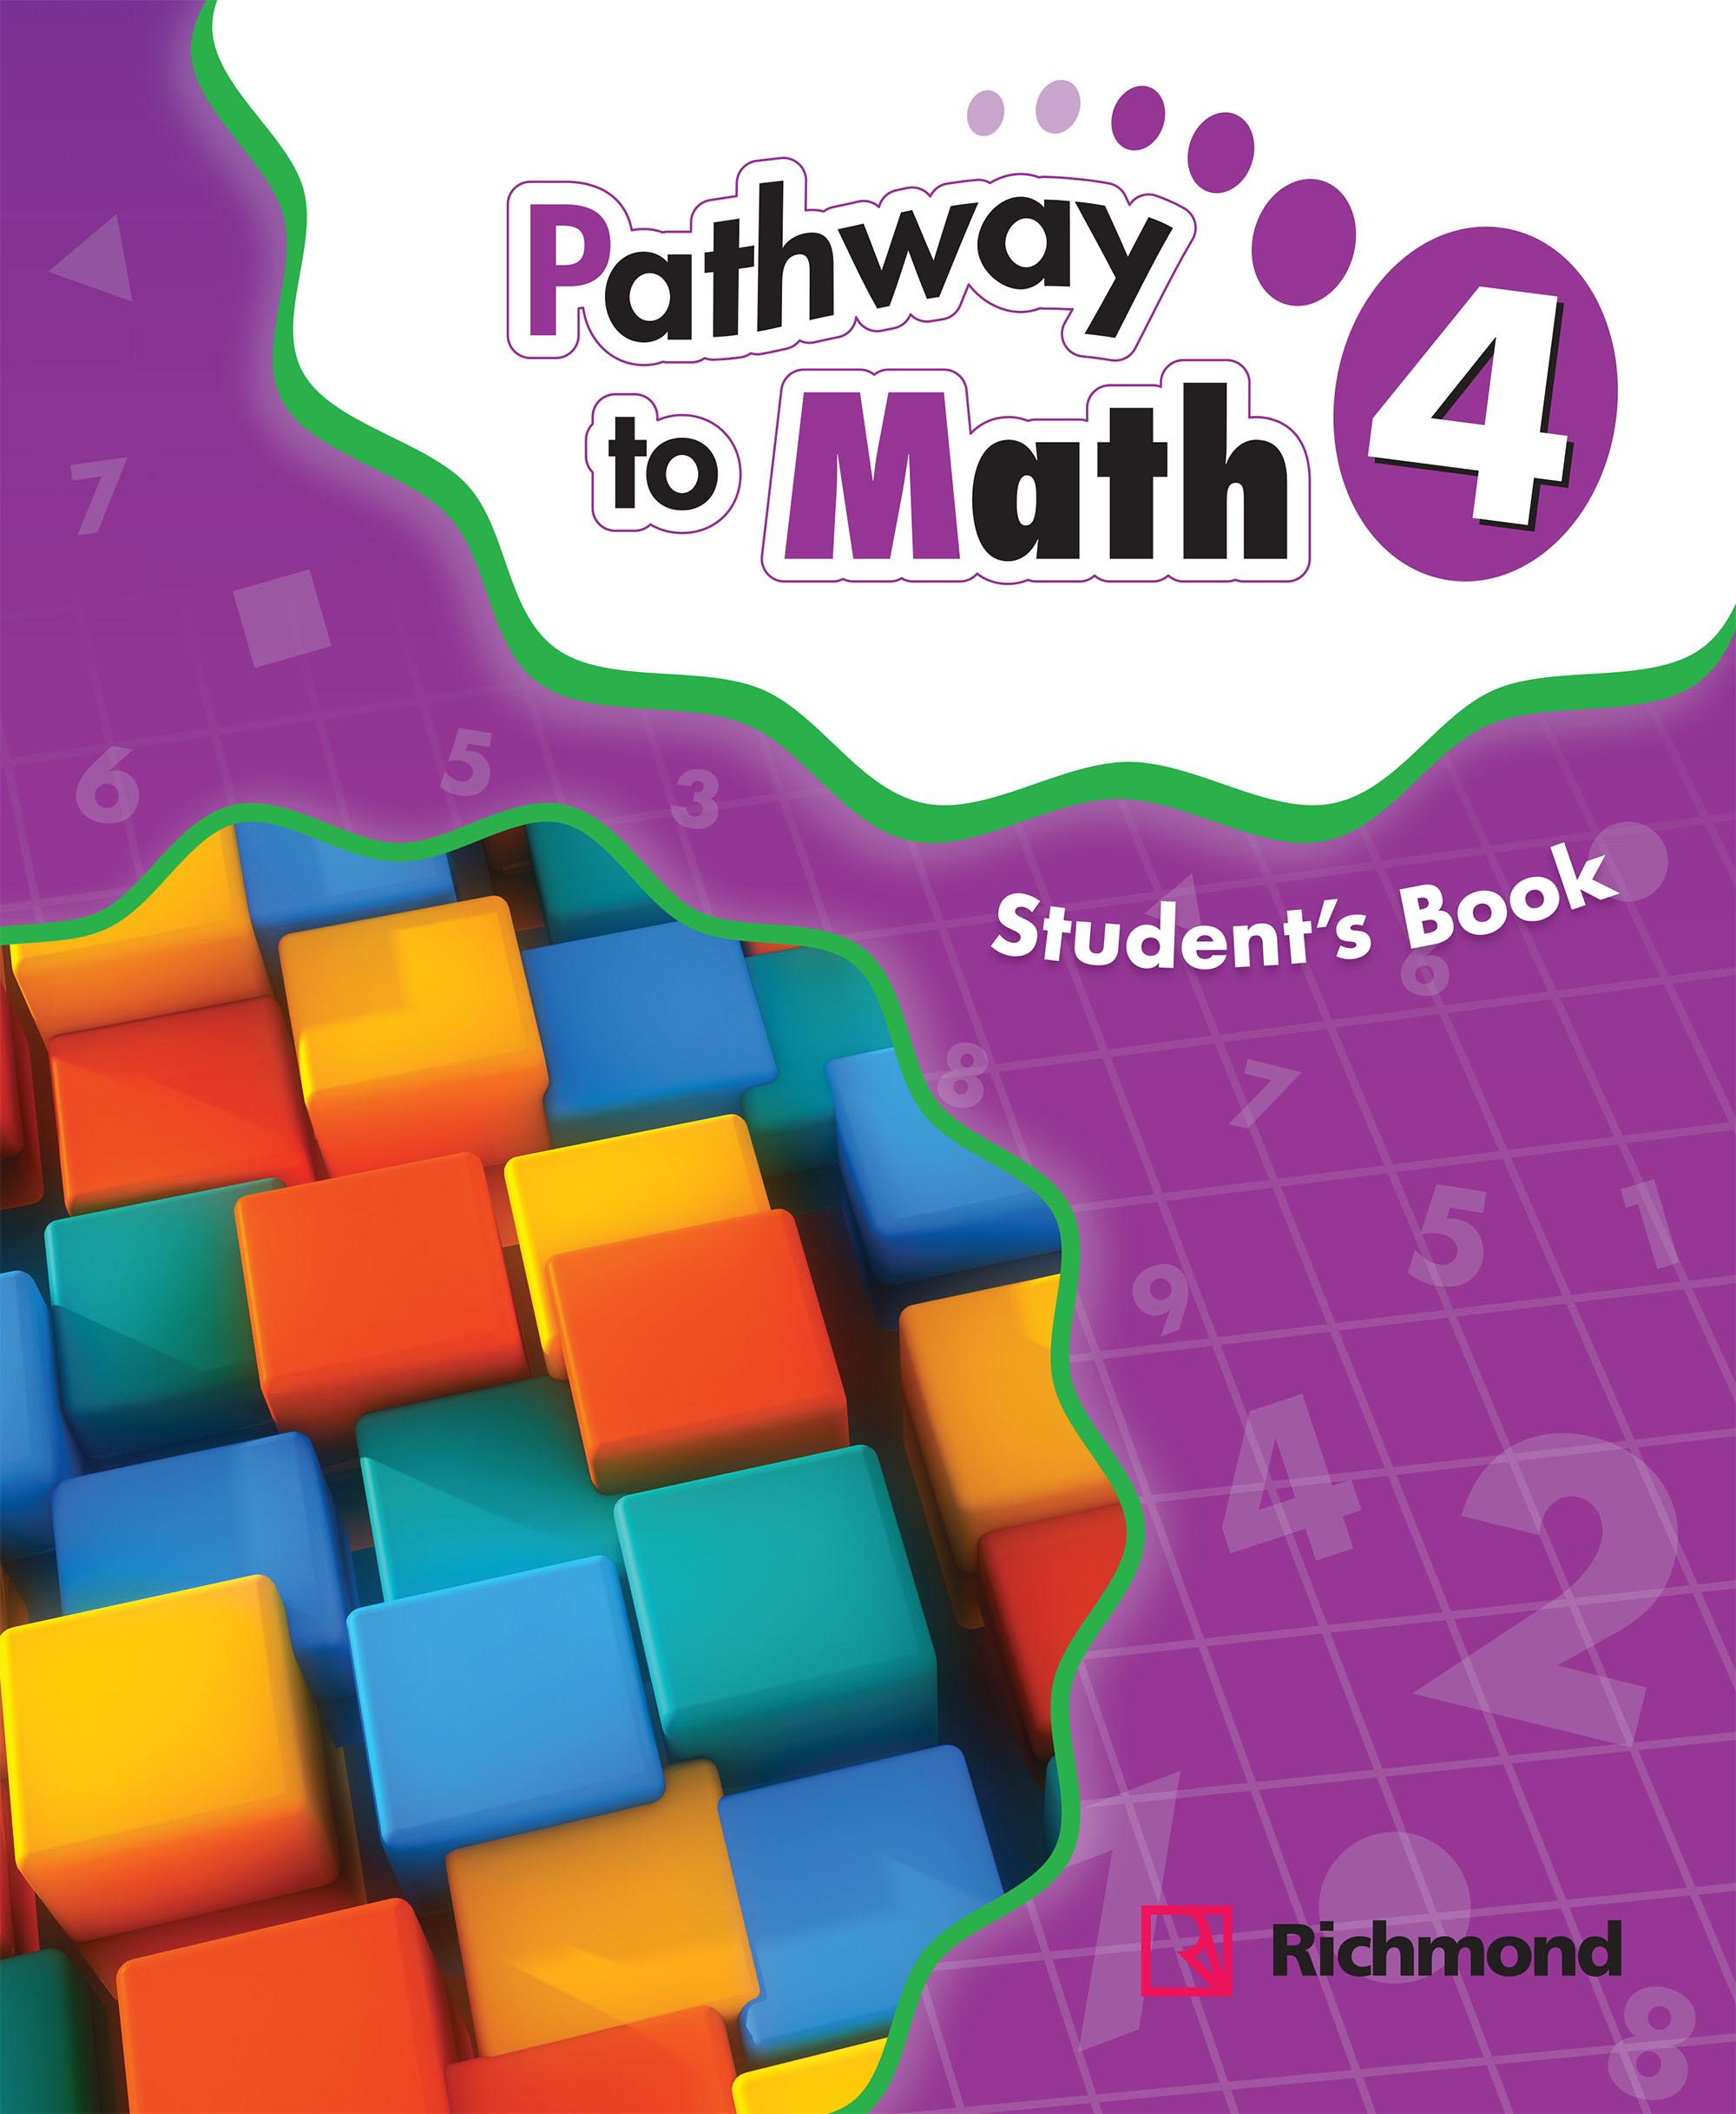 Pathway To Math 4 Pack (Student's Book with Activity Cards)